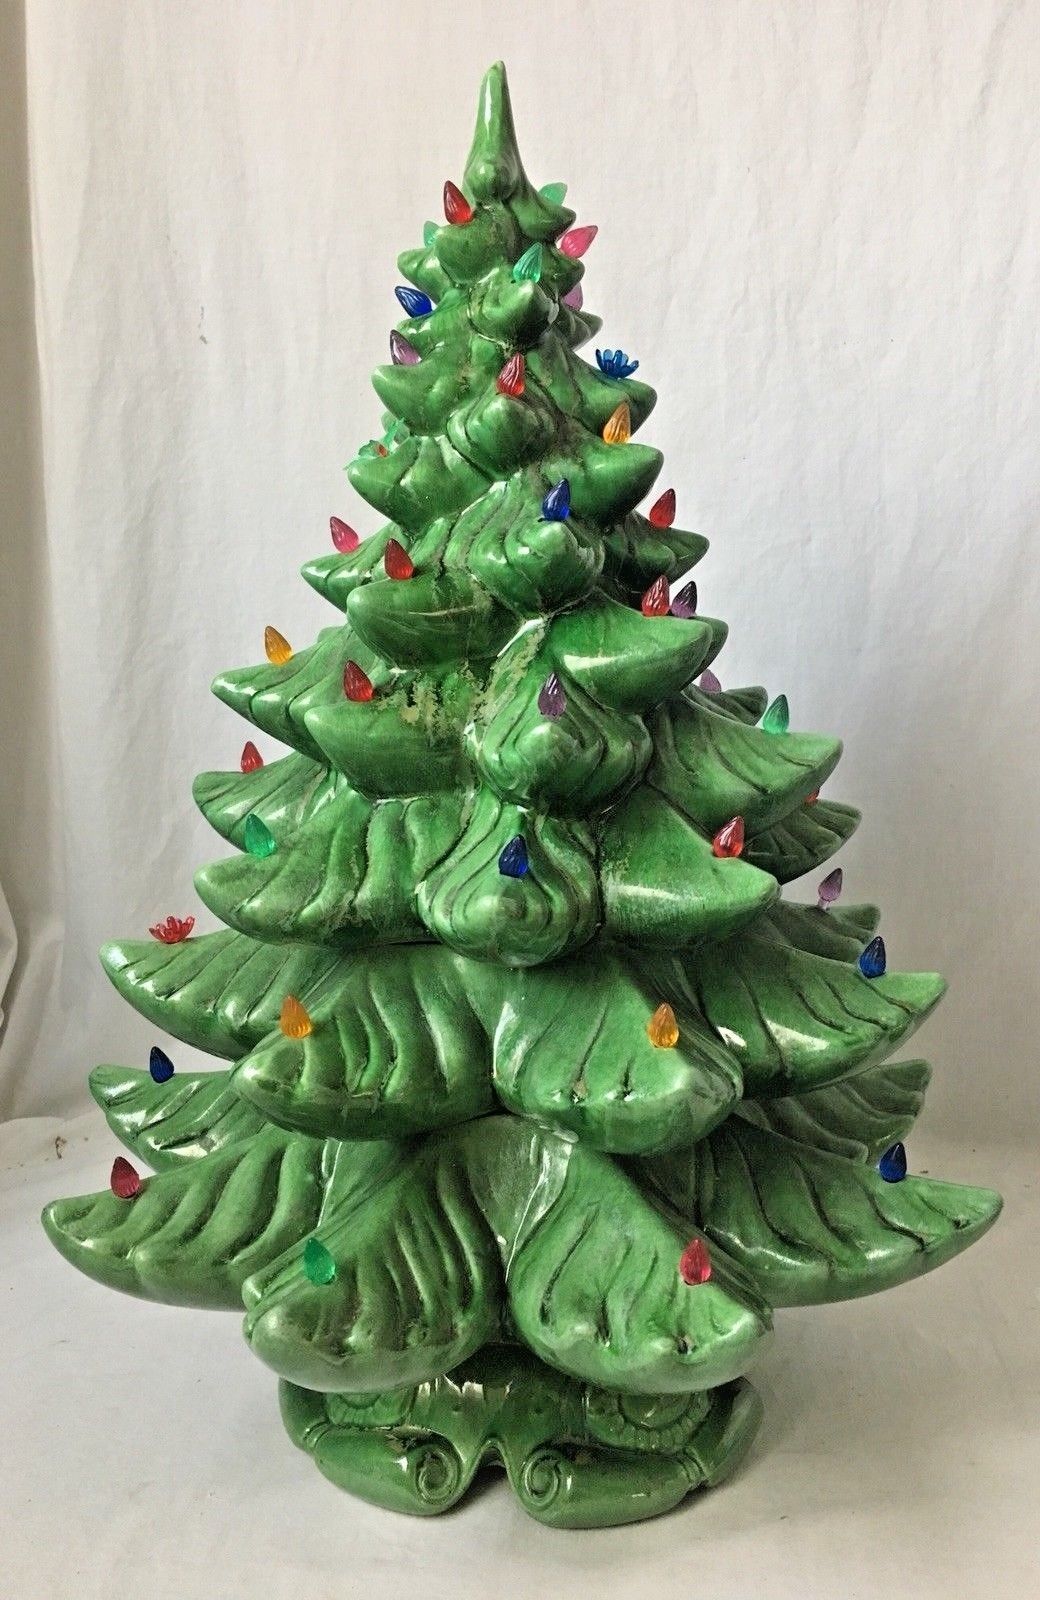 Vintage Ceramic Christmas Tree Green w Multi Color Lights 23" Table Top Musical - $249.95